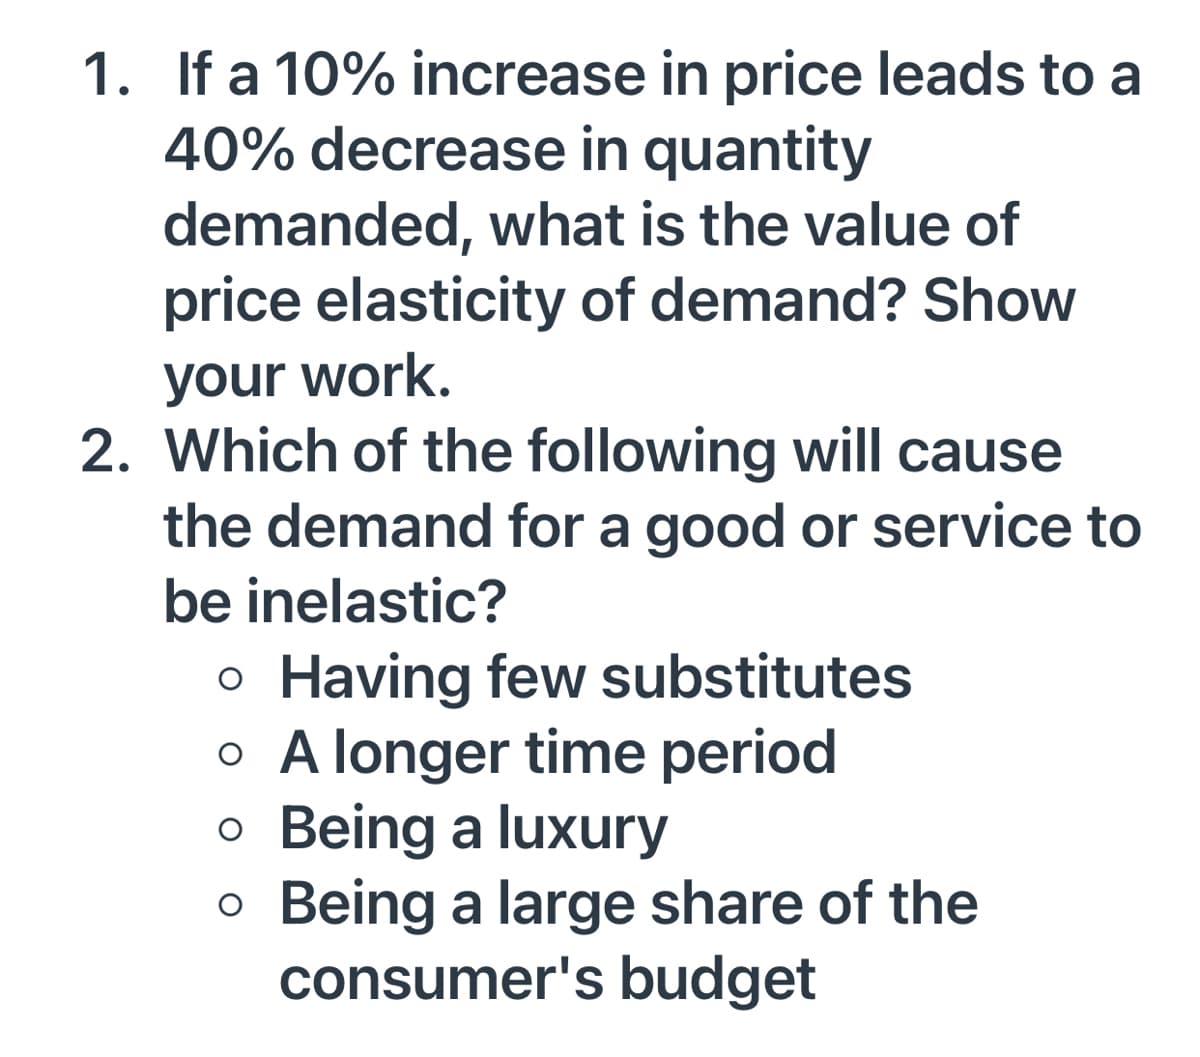 1. If a 10% increase in price leads to a
40% decrease in quantity
demanded, what is the value of
price elasticity of demand? Show
your work.
2. Which of the following will cause
the demand for a good or service to
be inelastic?
o Having few substitutes
o A longer time period
o Being a luxury
o Being a large share of the
consumer's budget
